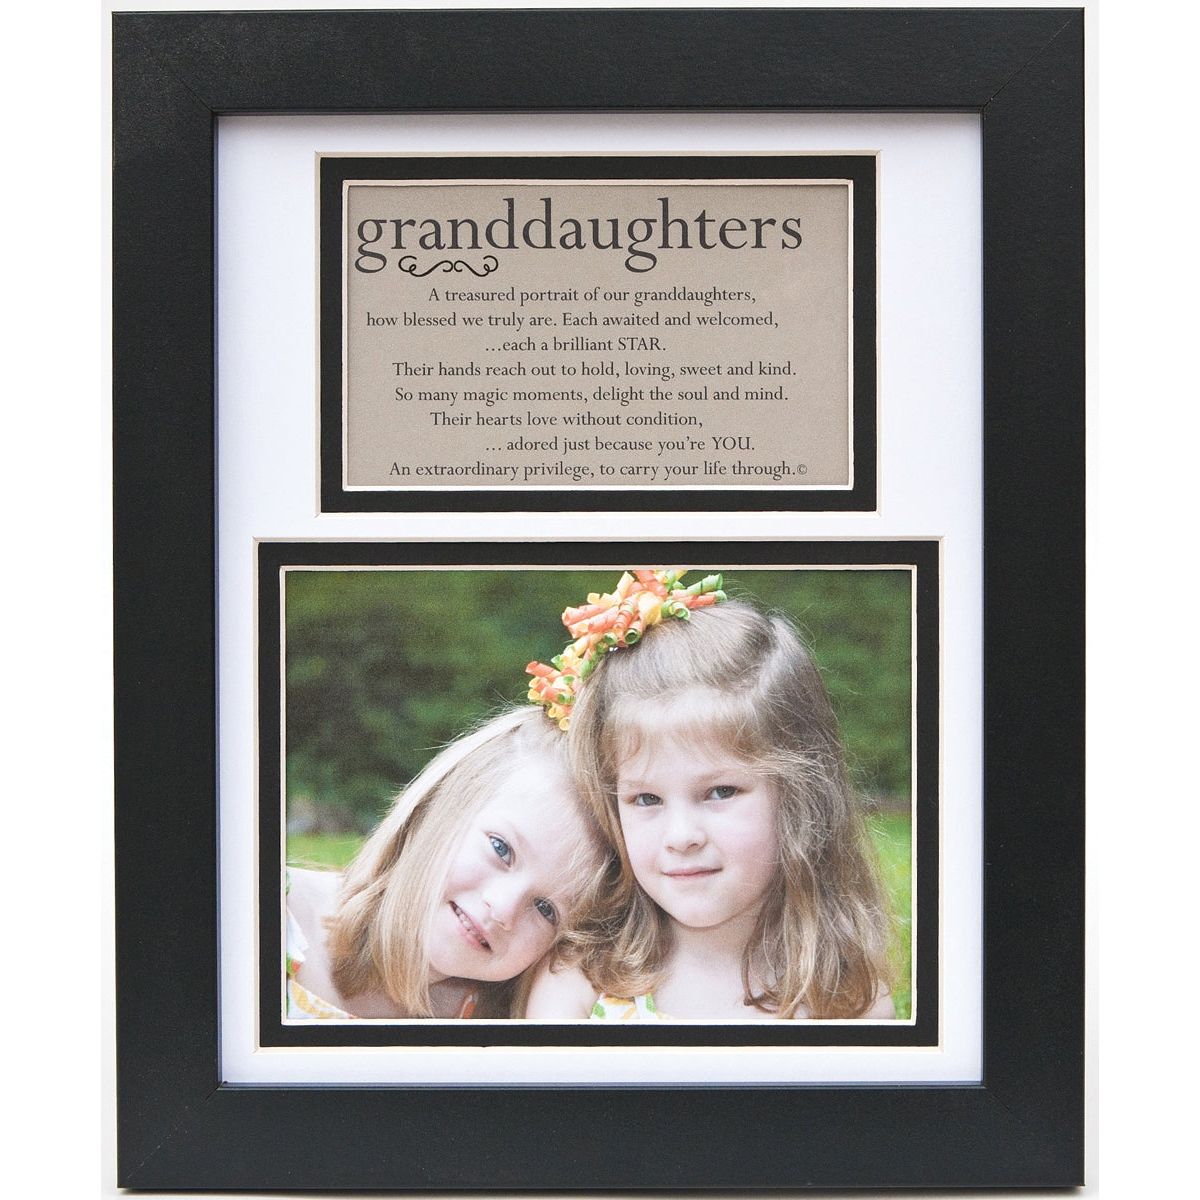 8x10 black frame with white and black double mat, includes &quot;Granddaughters&quot; poem and space for photo.